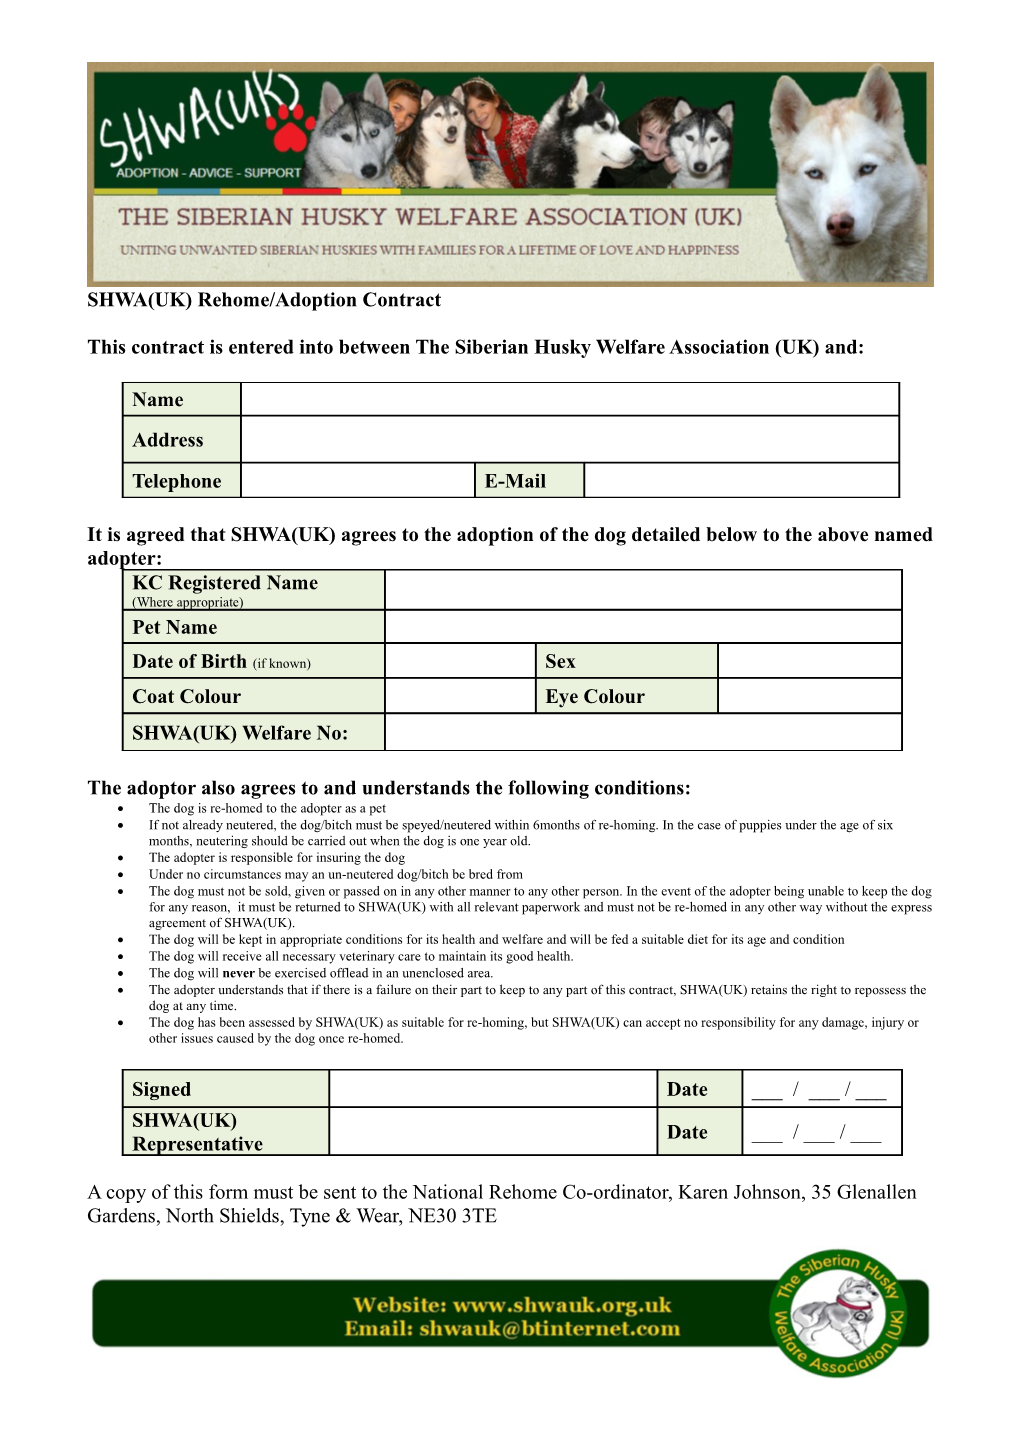 SHWA(UK) Rehome/Adoption Contract